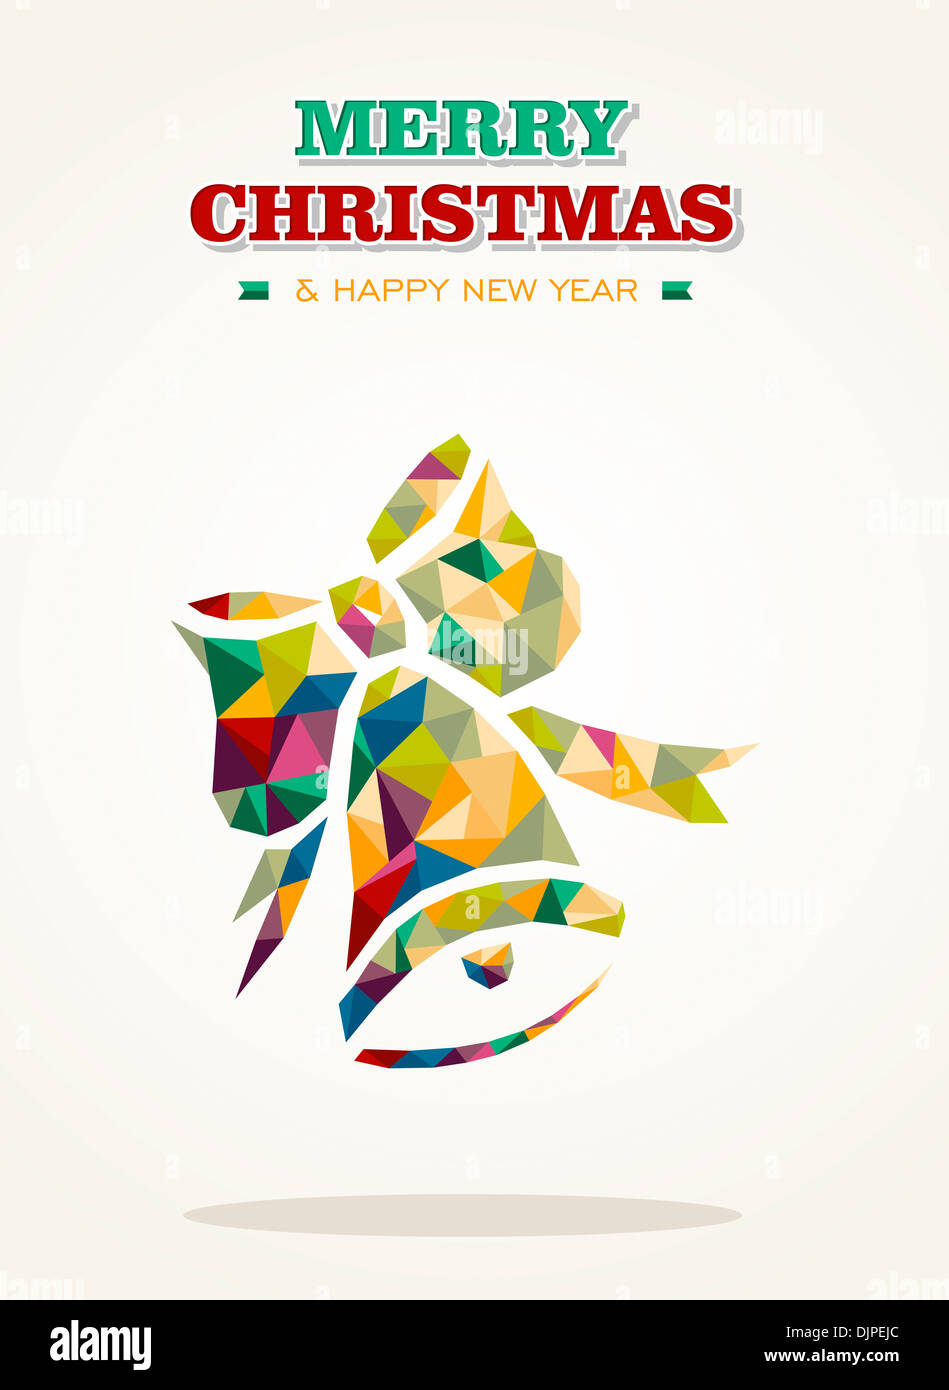 Christmas decorations elements and ornaments. Vector file organized in layers for easy editing. Stock Photo